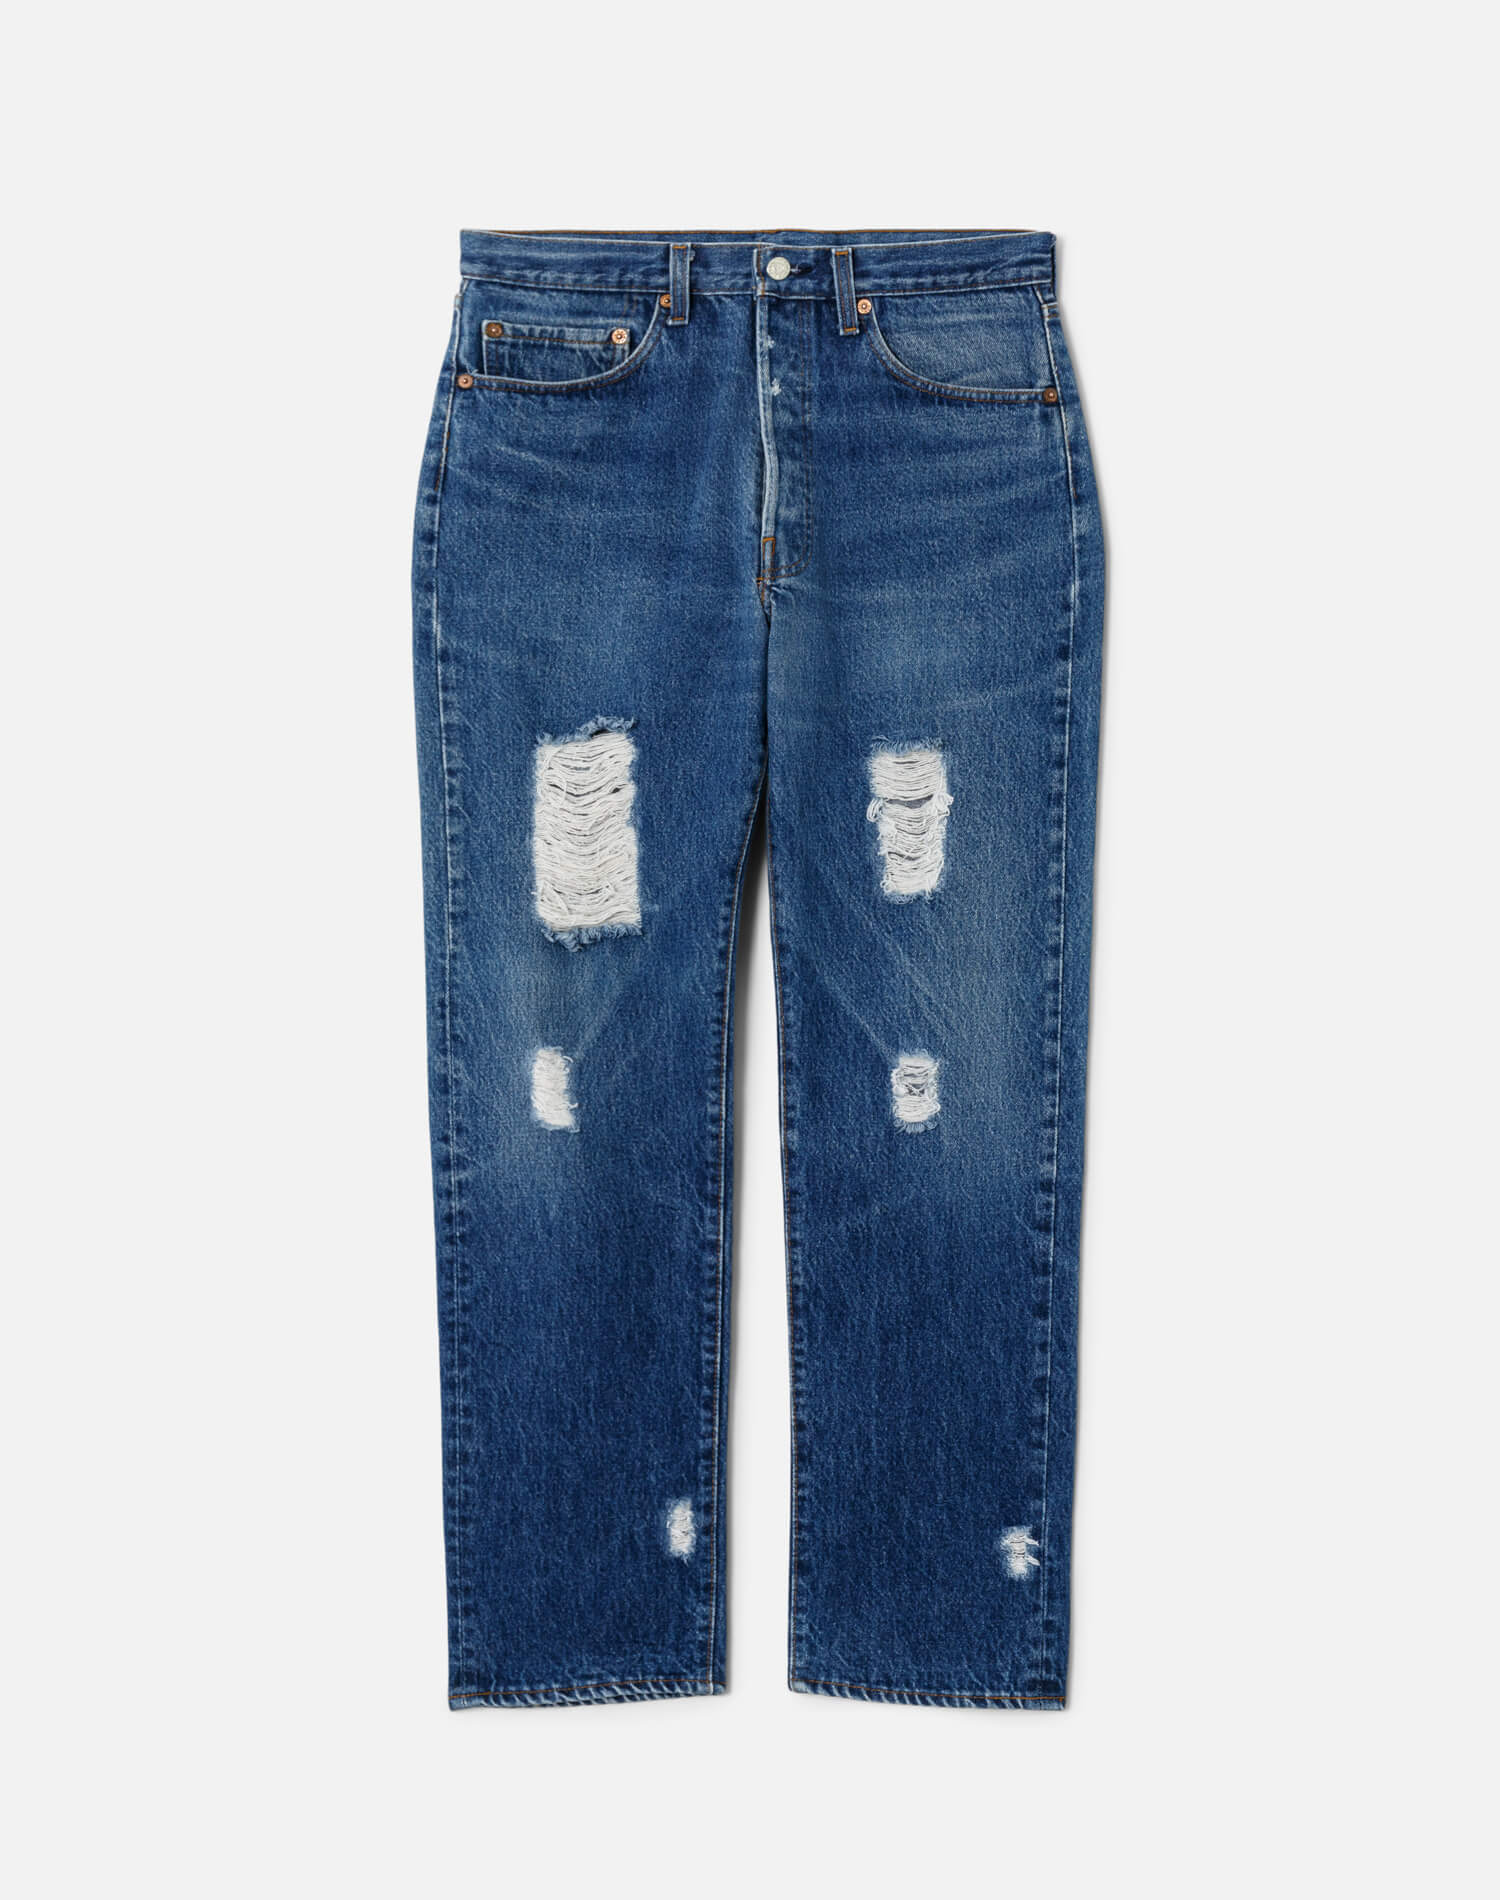 80s Destroyed Levi's 501 - #12